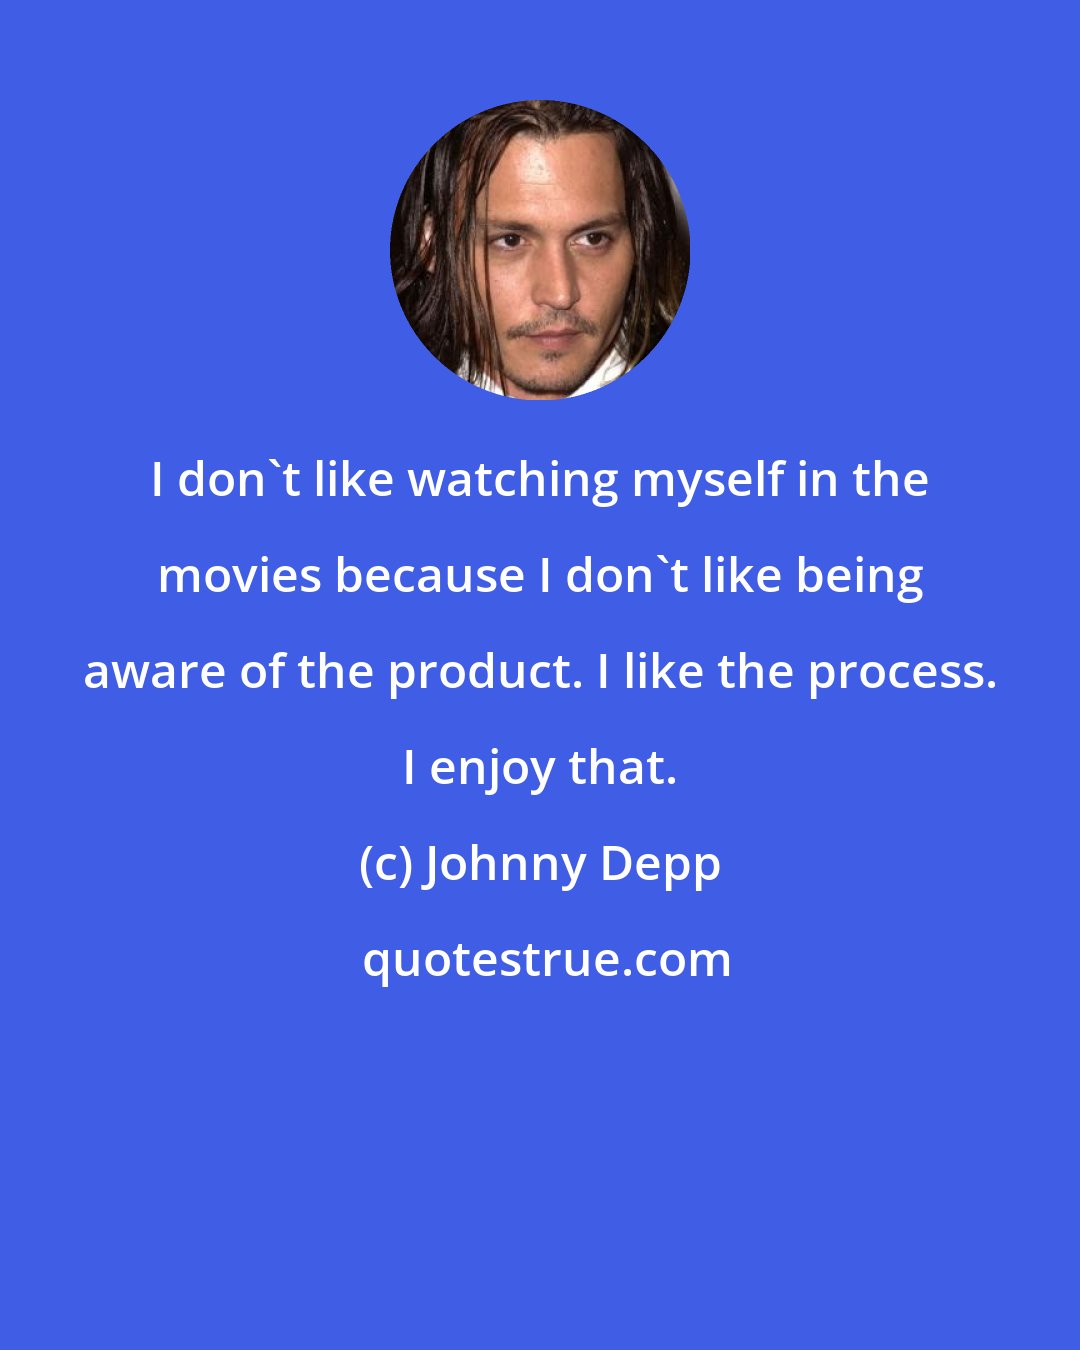 Johnny Depp: I don't like watching myself in the movies because I don't like being aware of the product. I like the process. I enjoy that.